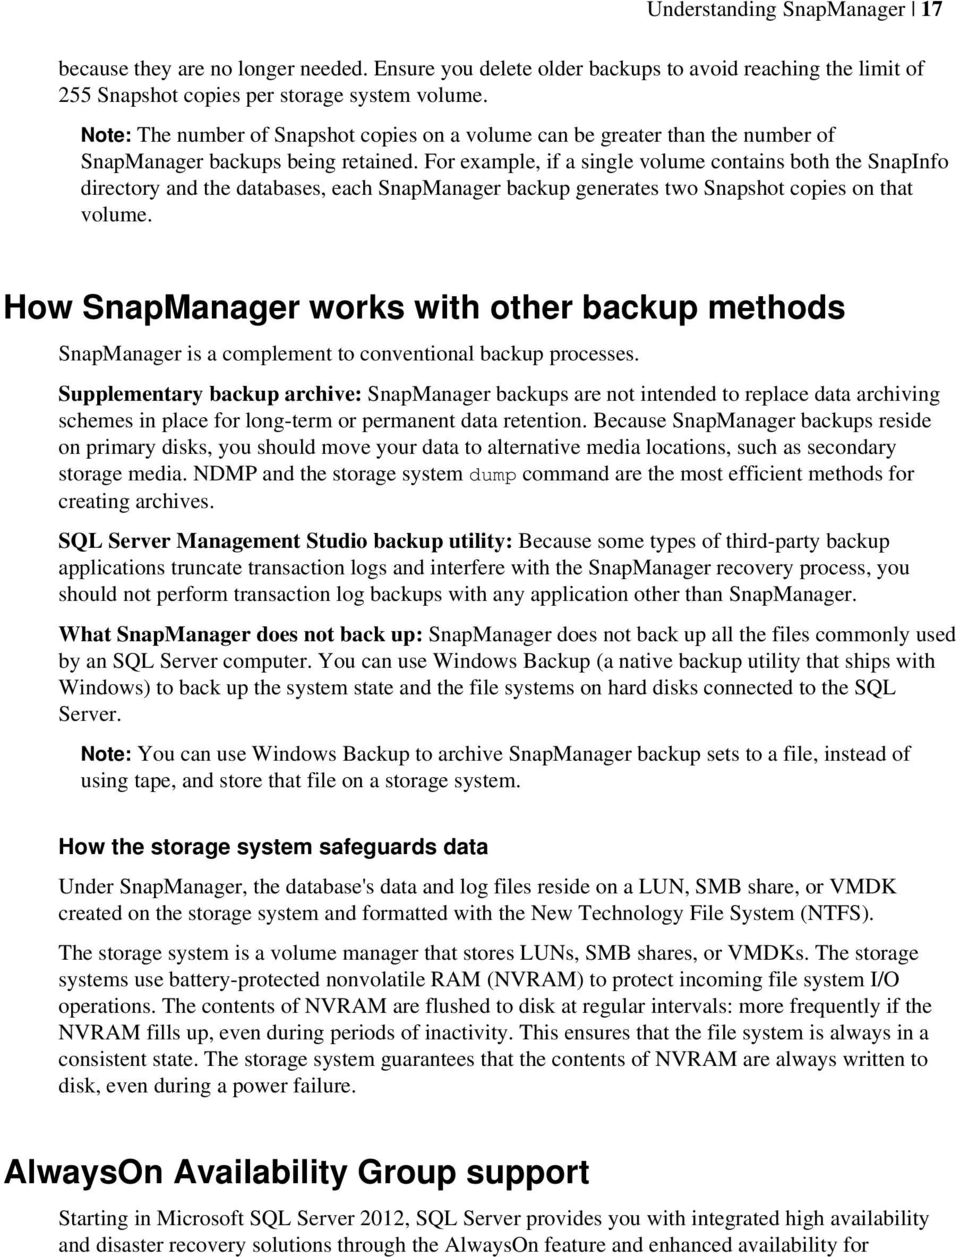 For example, if a single volume contains both the SnapInfo directory and the databases, each SnapManager backup generates two Snapshot copies on that volume.